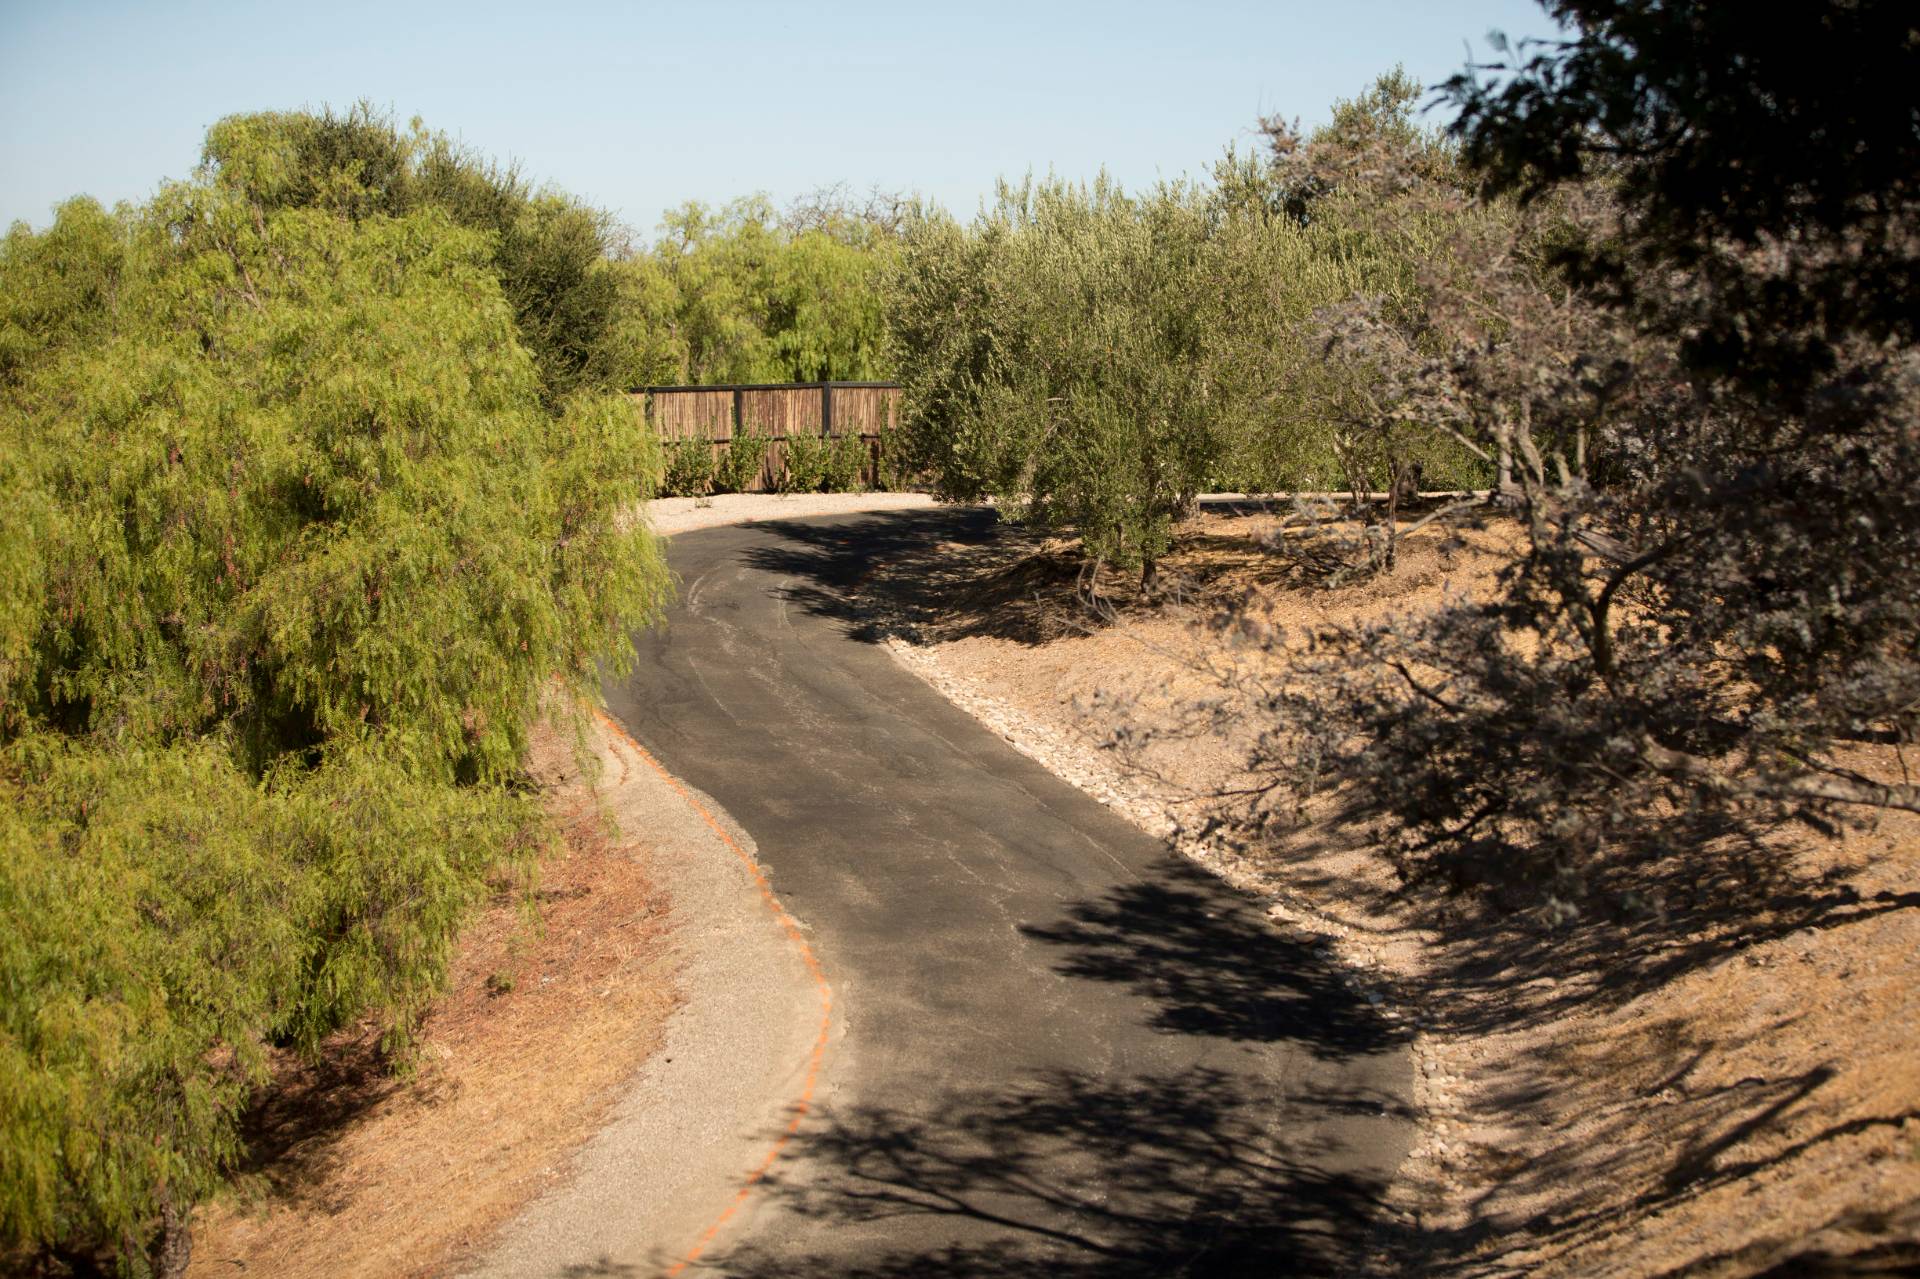 The road before GPM completed the chip seal project in Santa Ynez.